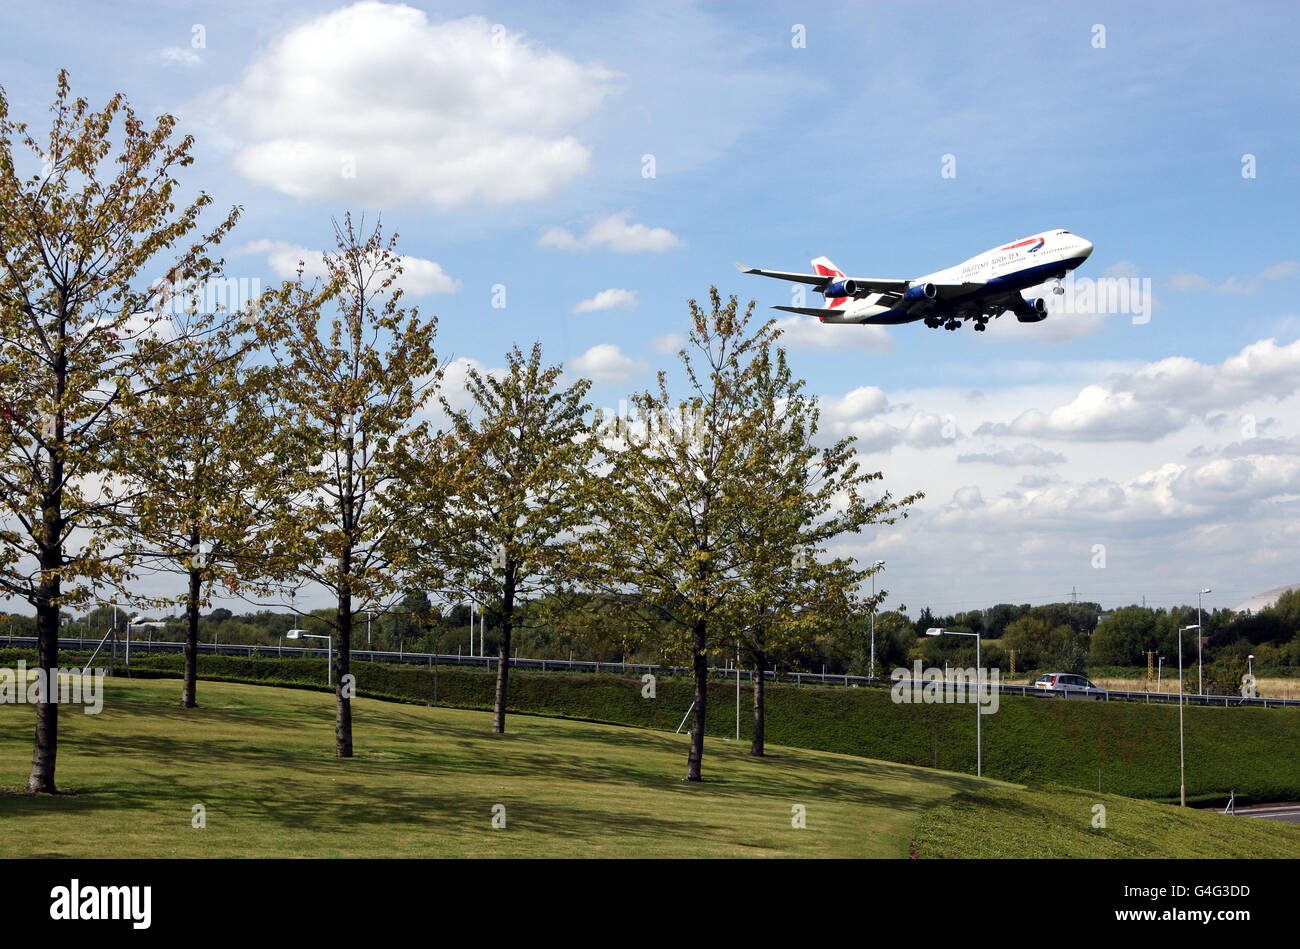 A British Airways plane lands over trees at Heathrow Airport in West London PRESS ASSOCIATION Photo. Picture date: Monday August 22, 2011 See PA story . Photo credit should read: Steve Parsons/PA Wire Stock Photo